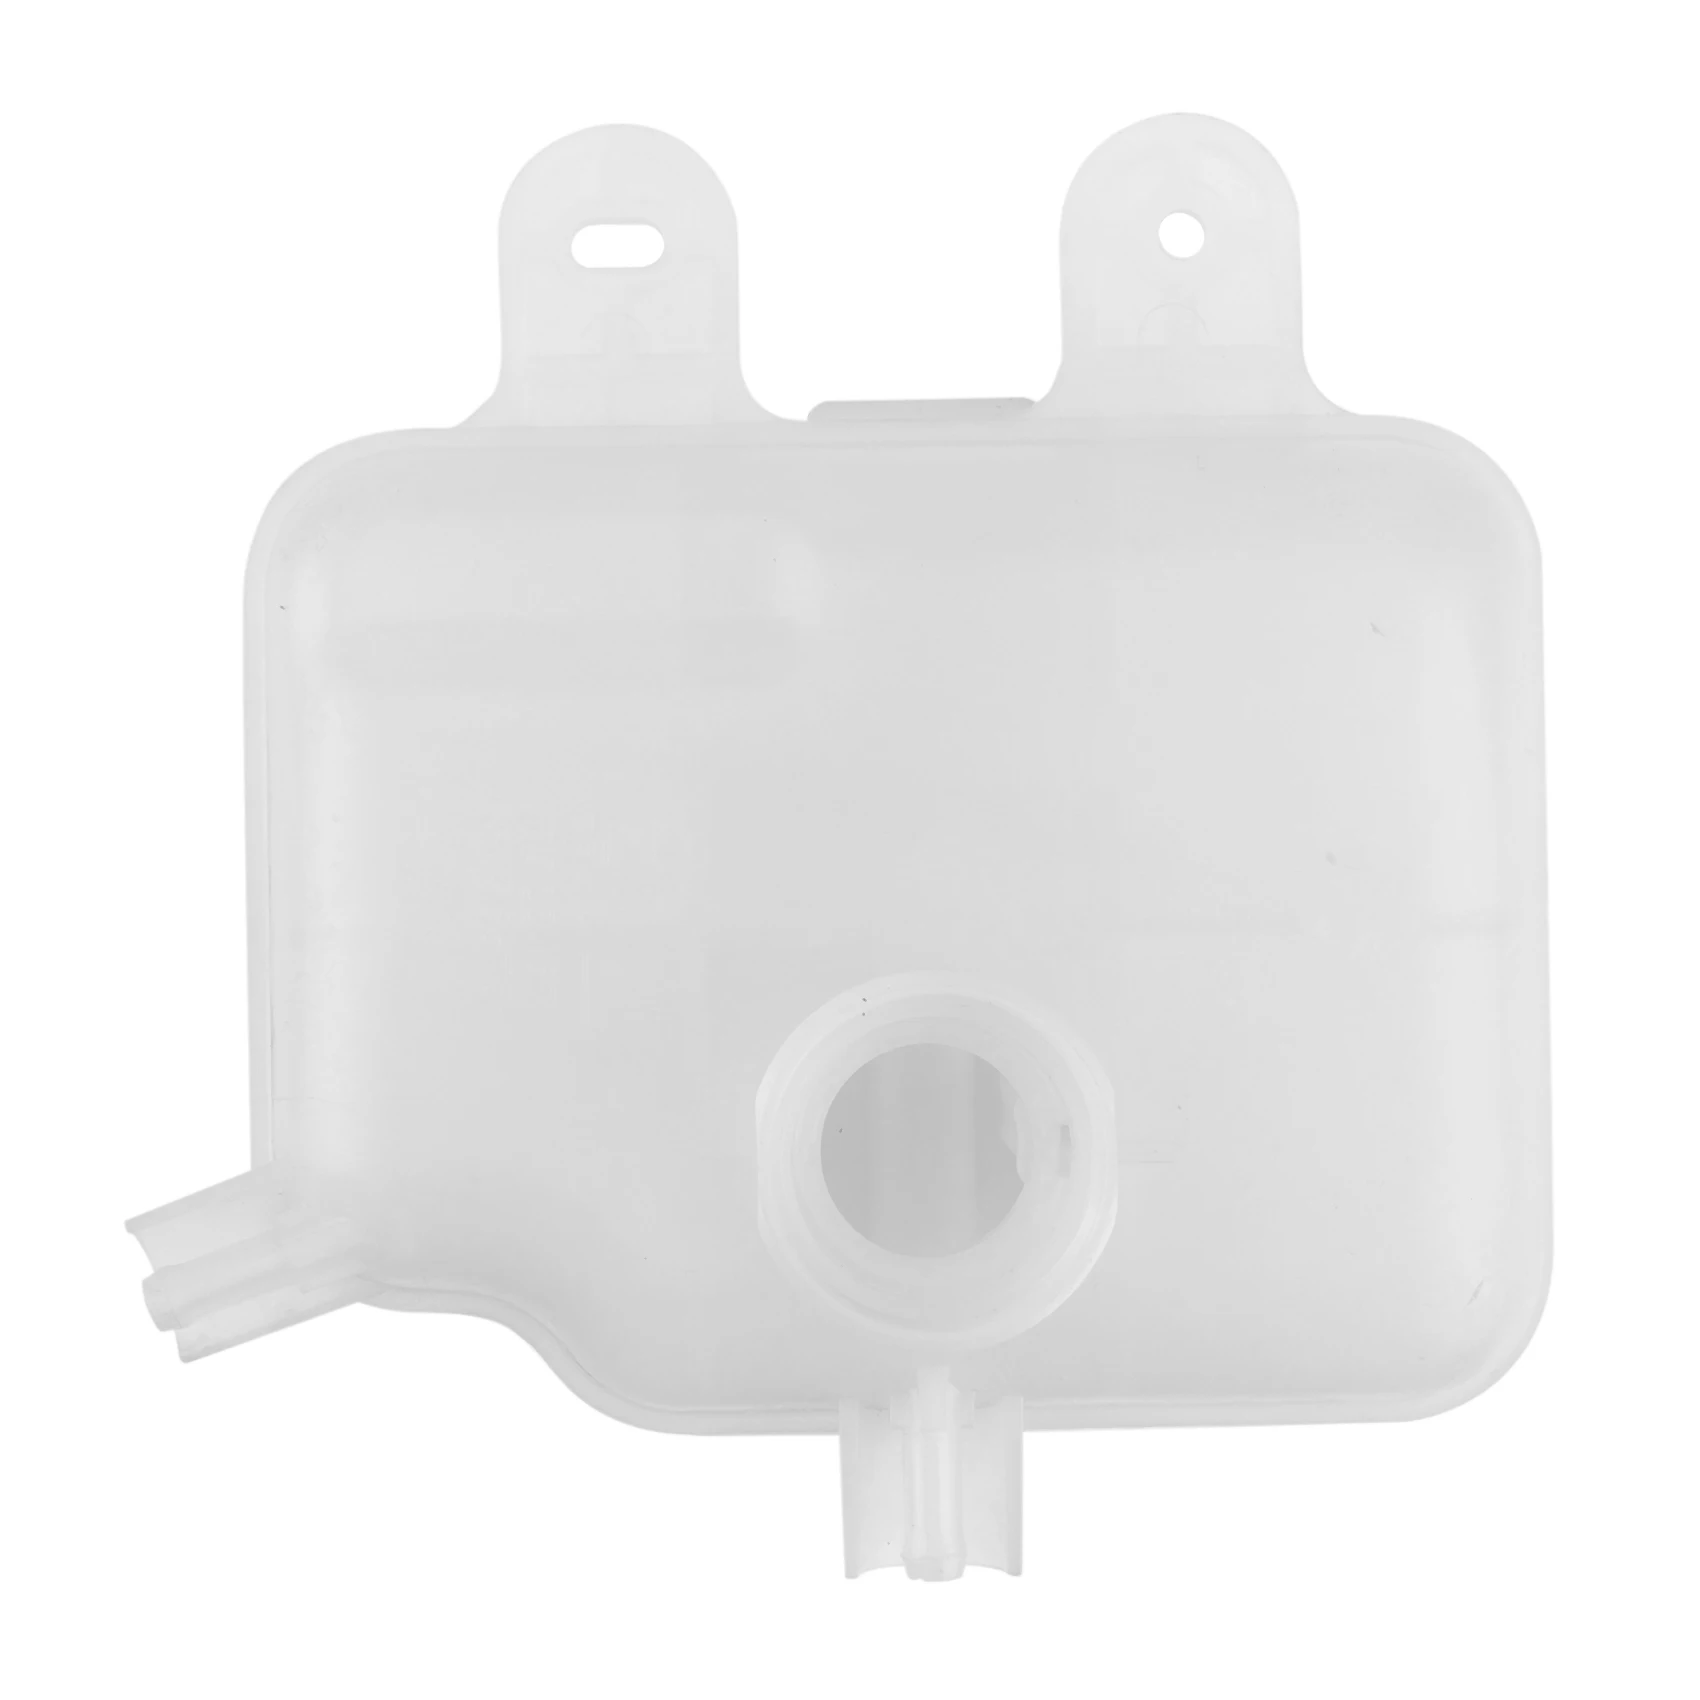 GM Surge Tank for Chevrolet Sail 1.5L 90922457 Water Tanks with Kettle, Coolant, Antifreeze and